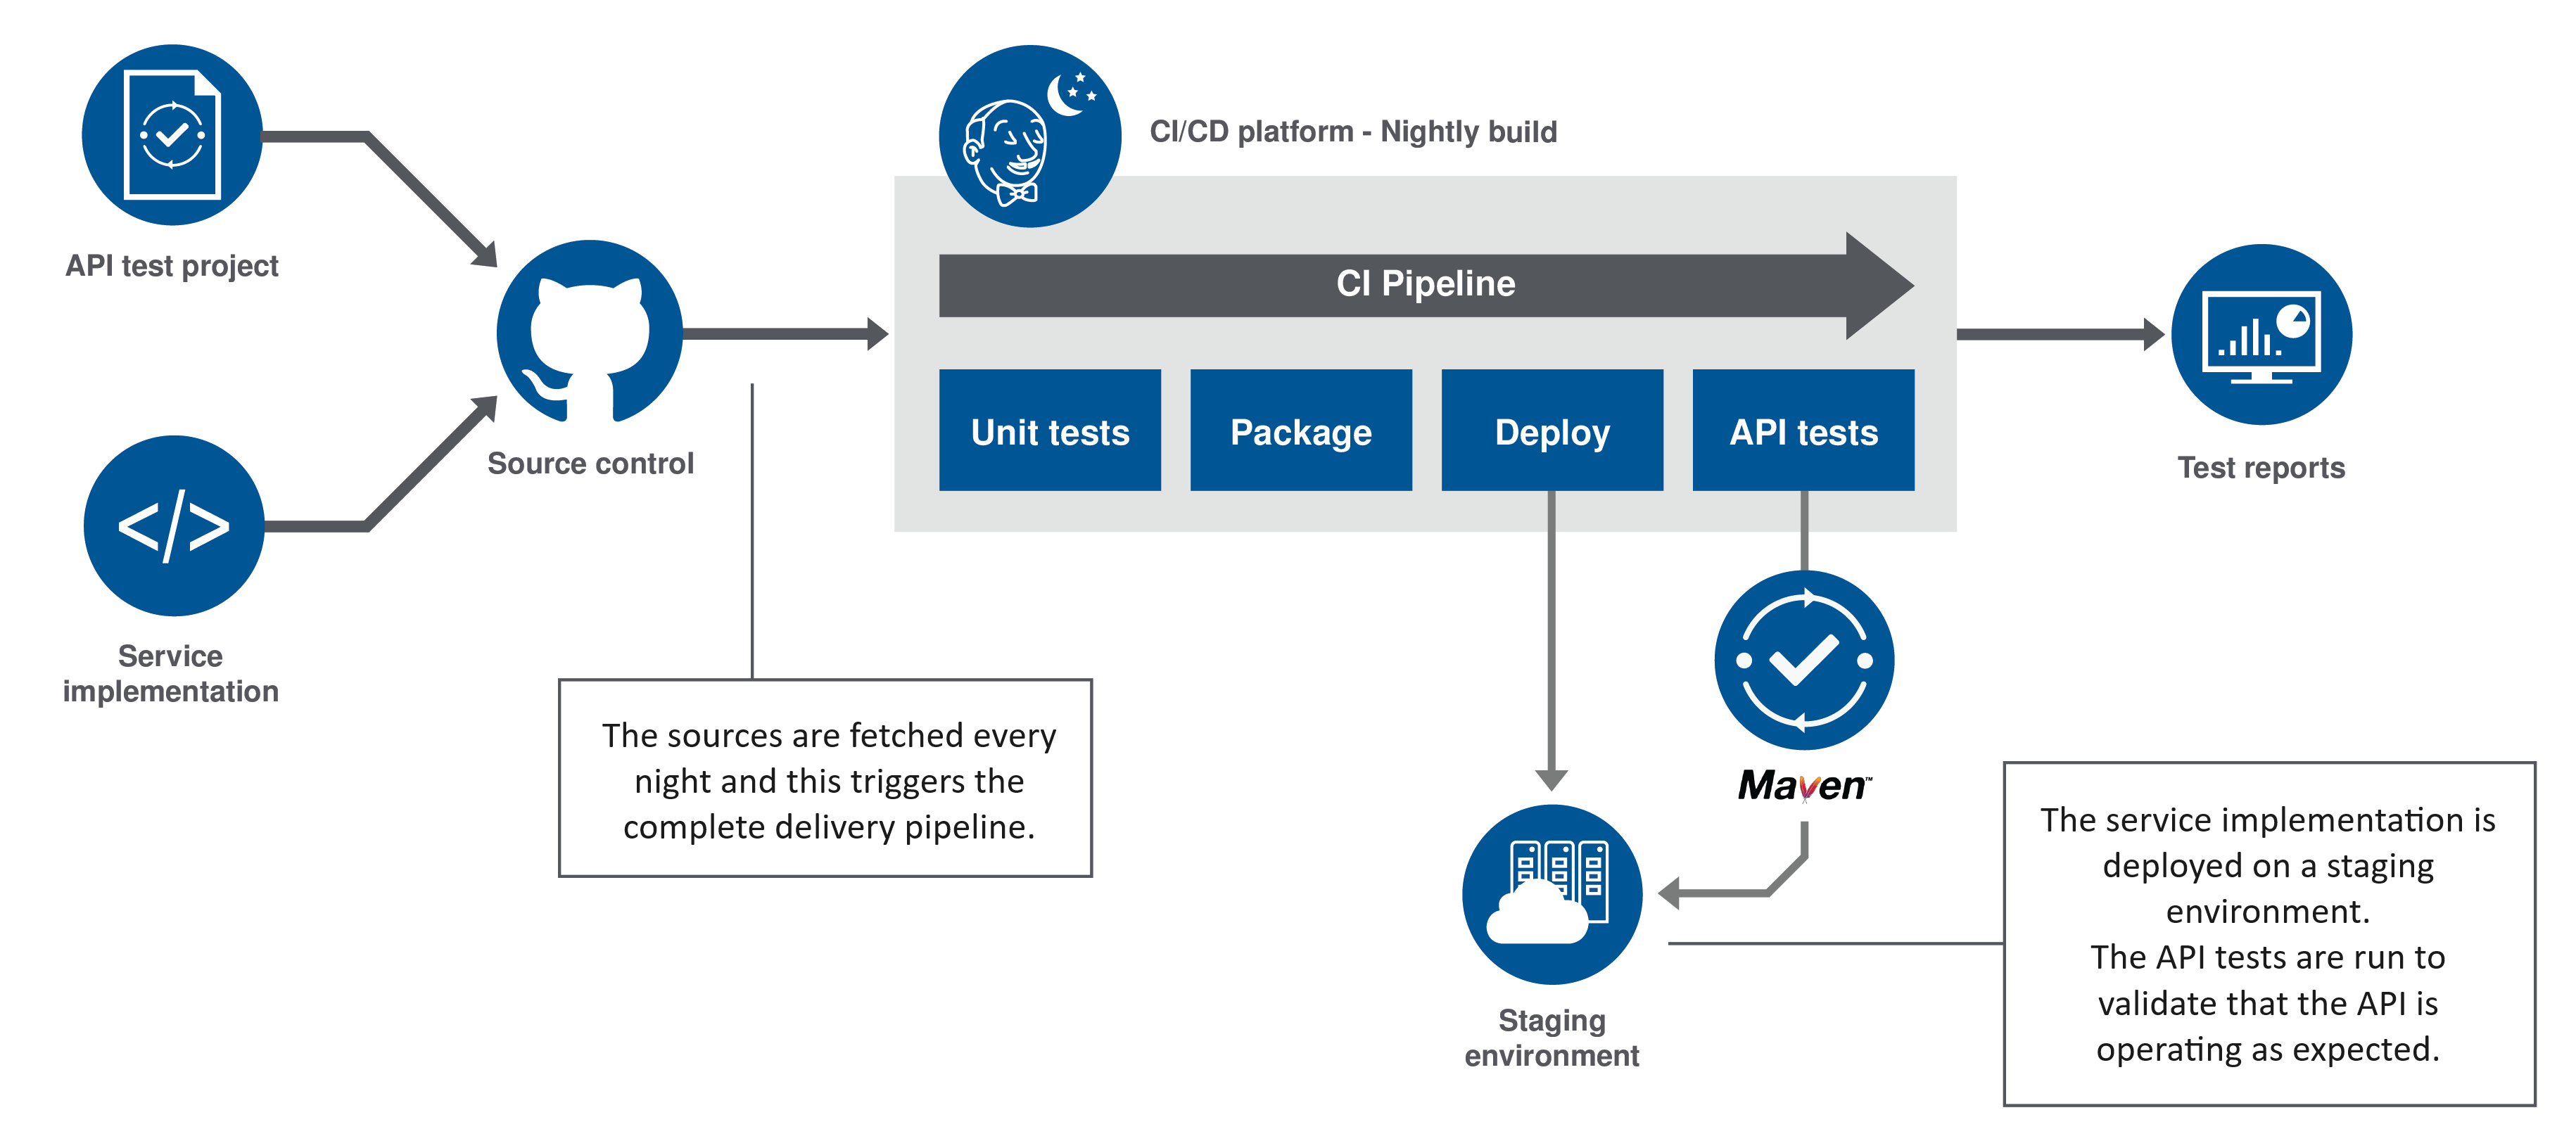 The files are fetched from the source control every night, and this triggers the integration pipeline: after running the unit tests and packaging the service implementation, the pipeline deploys it to a staging environment. Then, the API tests are run to validate that the API is operating as expected.